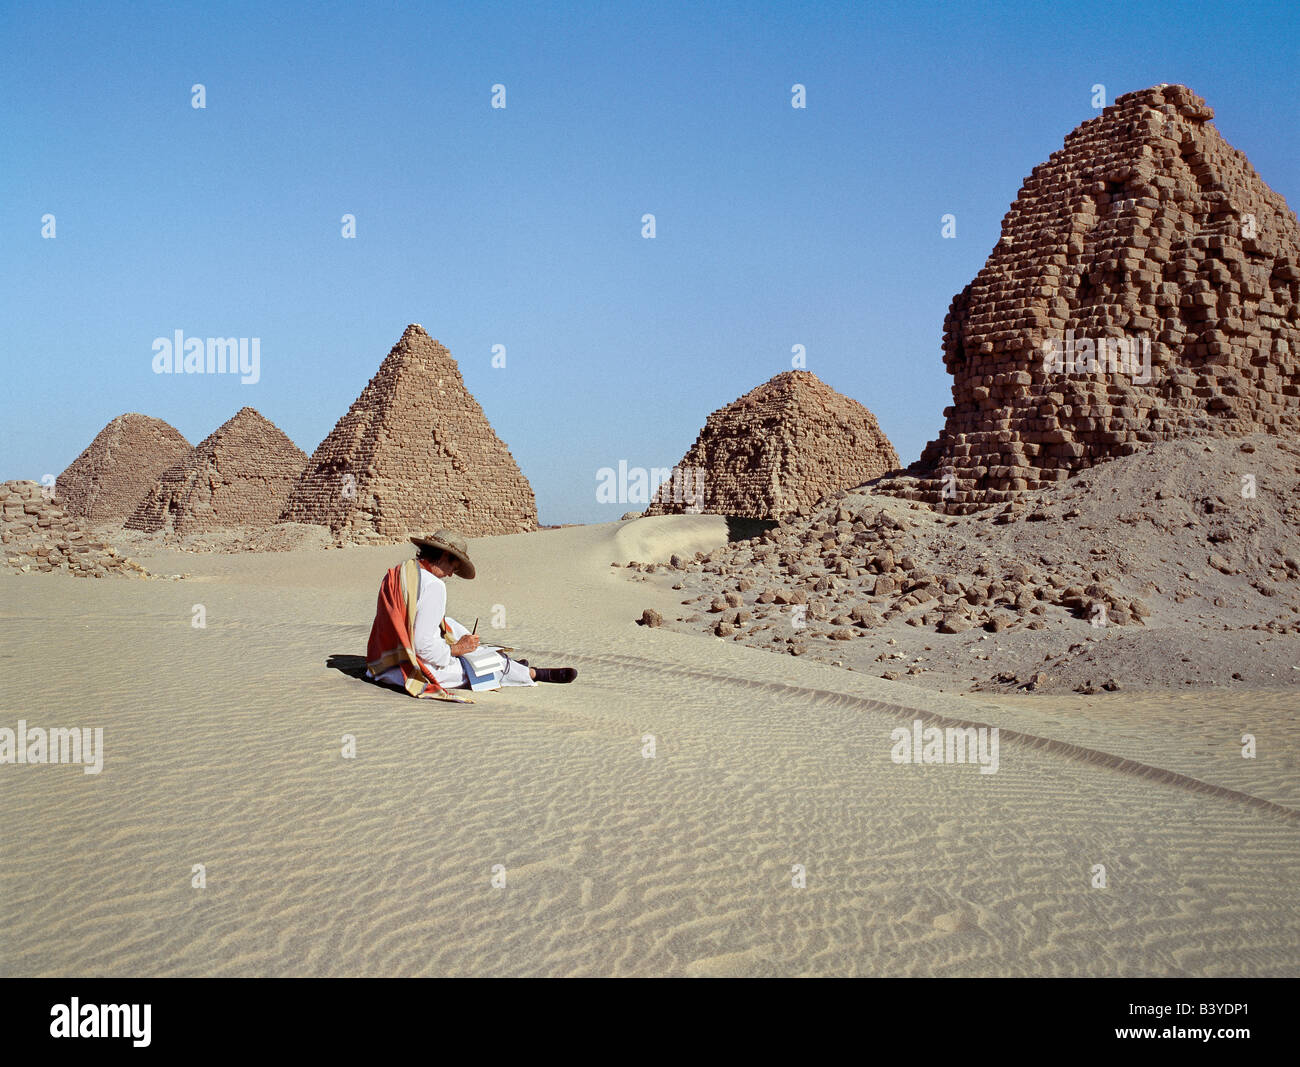 Sudan, Sahara Desert, Nuri. A tourist at the ancient pyramids at Nuri date between 700BC and 300BC. Nineteen kings and fifty-three queens from all the dynasties of the Kingdom of Cush are buried in these pyramids including Taharqa (690BC-664BC), the famous Black Pharaoh who ruled over Egypt in the 7th century BC until the Assyrians expelled him from Egypt.In 300BC the capital of the Kingdom of Cush and the royal burial grounds were moved to Meroe due to conflict with Egypt whose expeditionary forces sacked Napata in their drive south. . Stock Photo